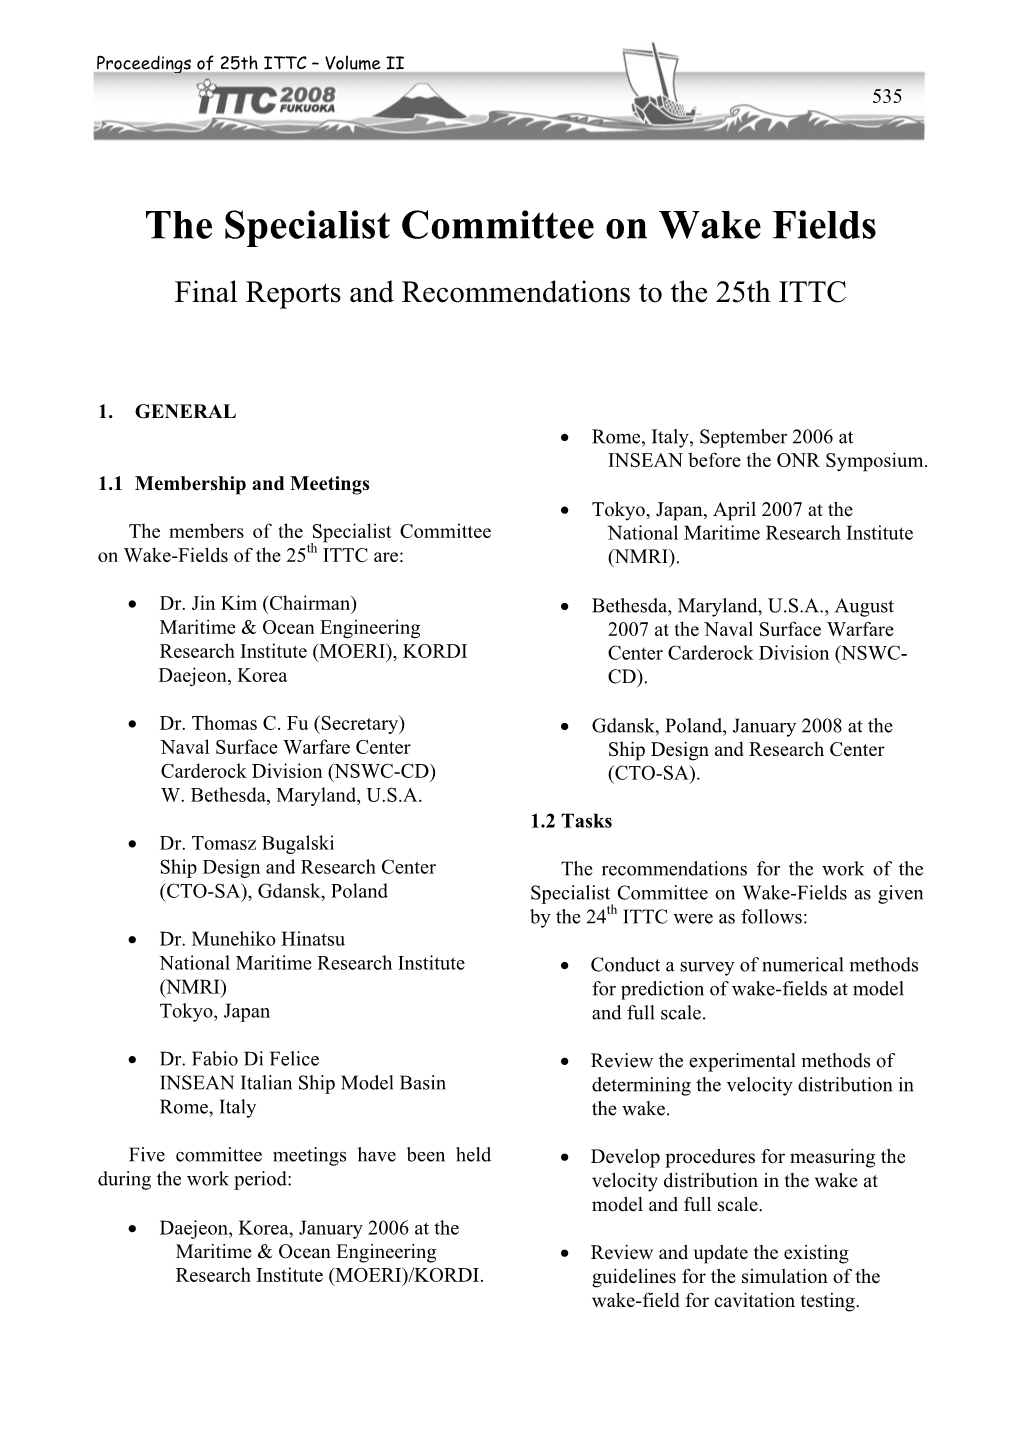 The Specialist Committee on Wake Fields Final Reports and Recommendations to the 25Th ITTC